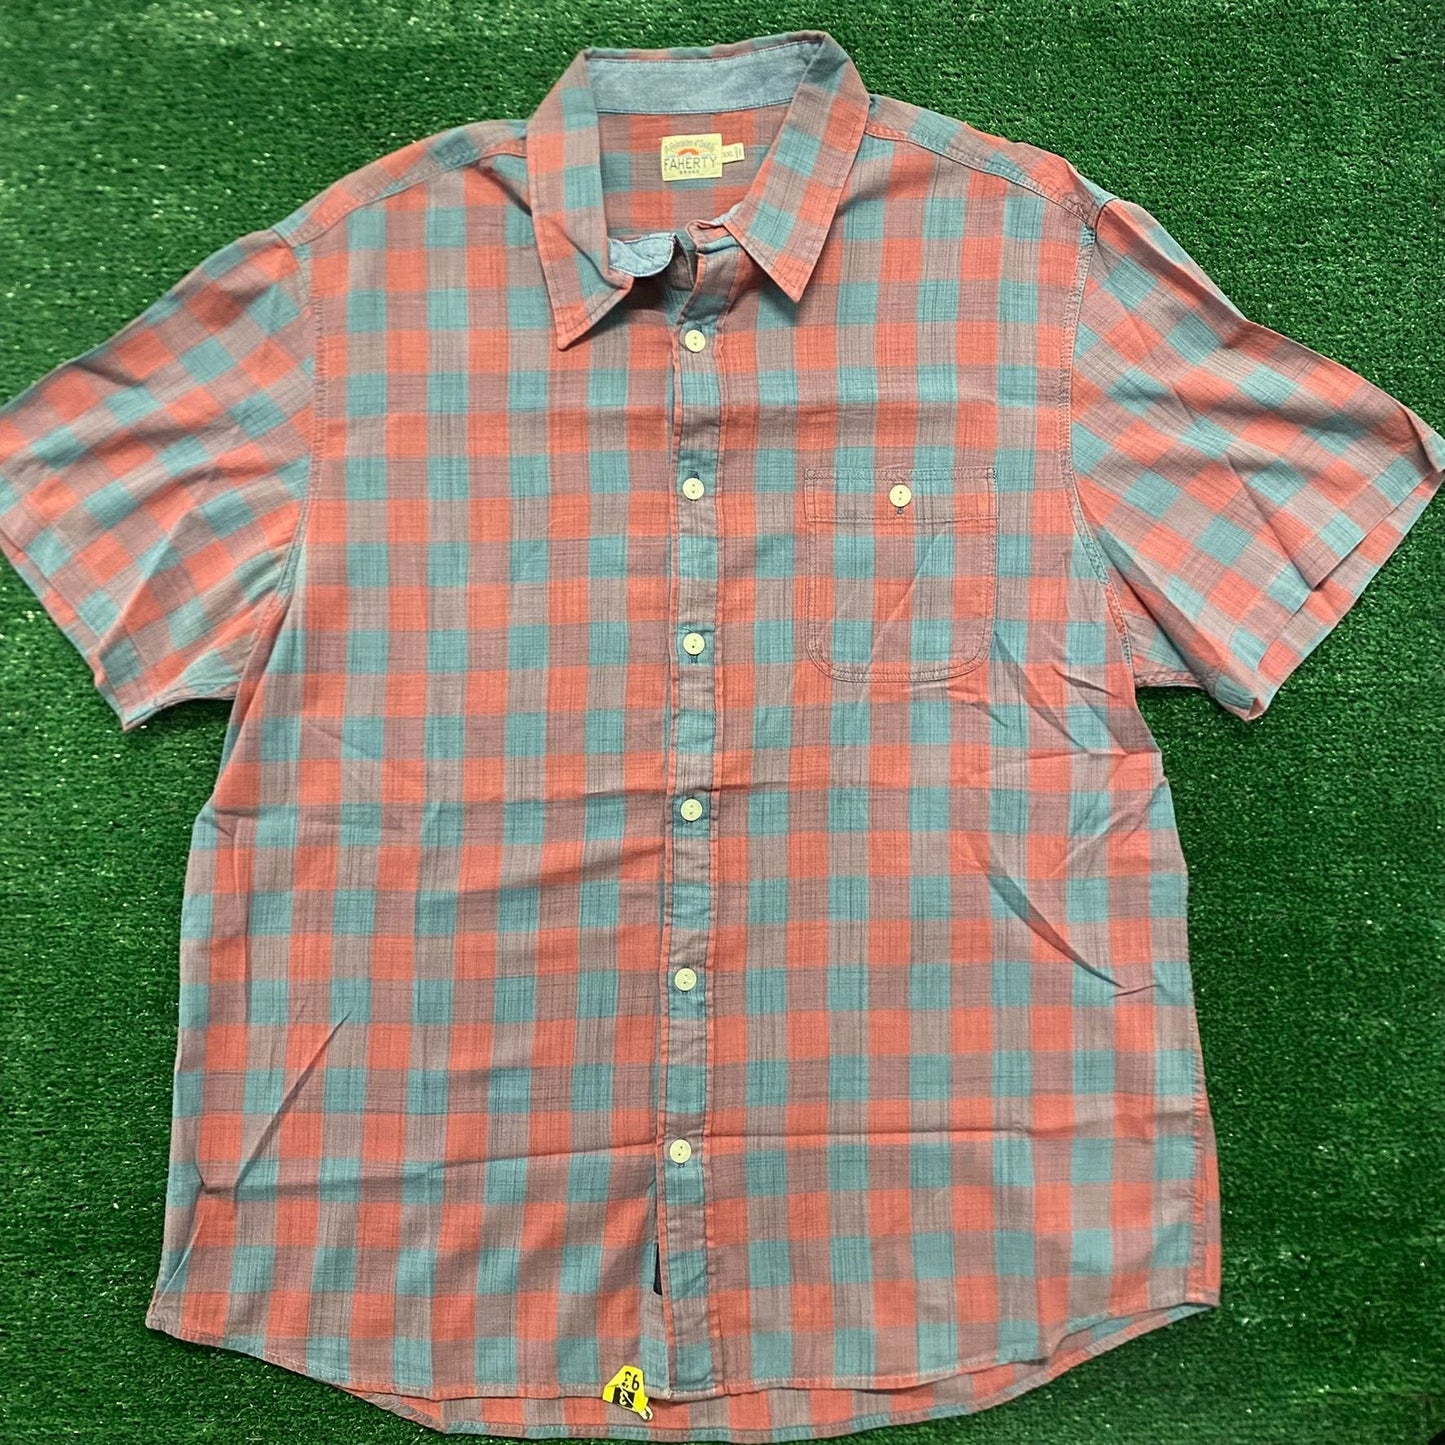 Faherty Checkered Plaid Vintage Button Up Casual Shirt